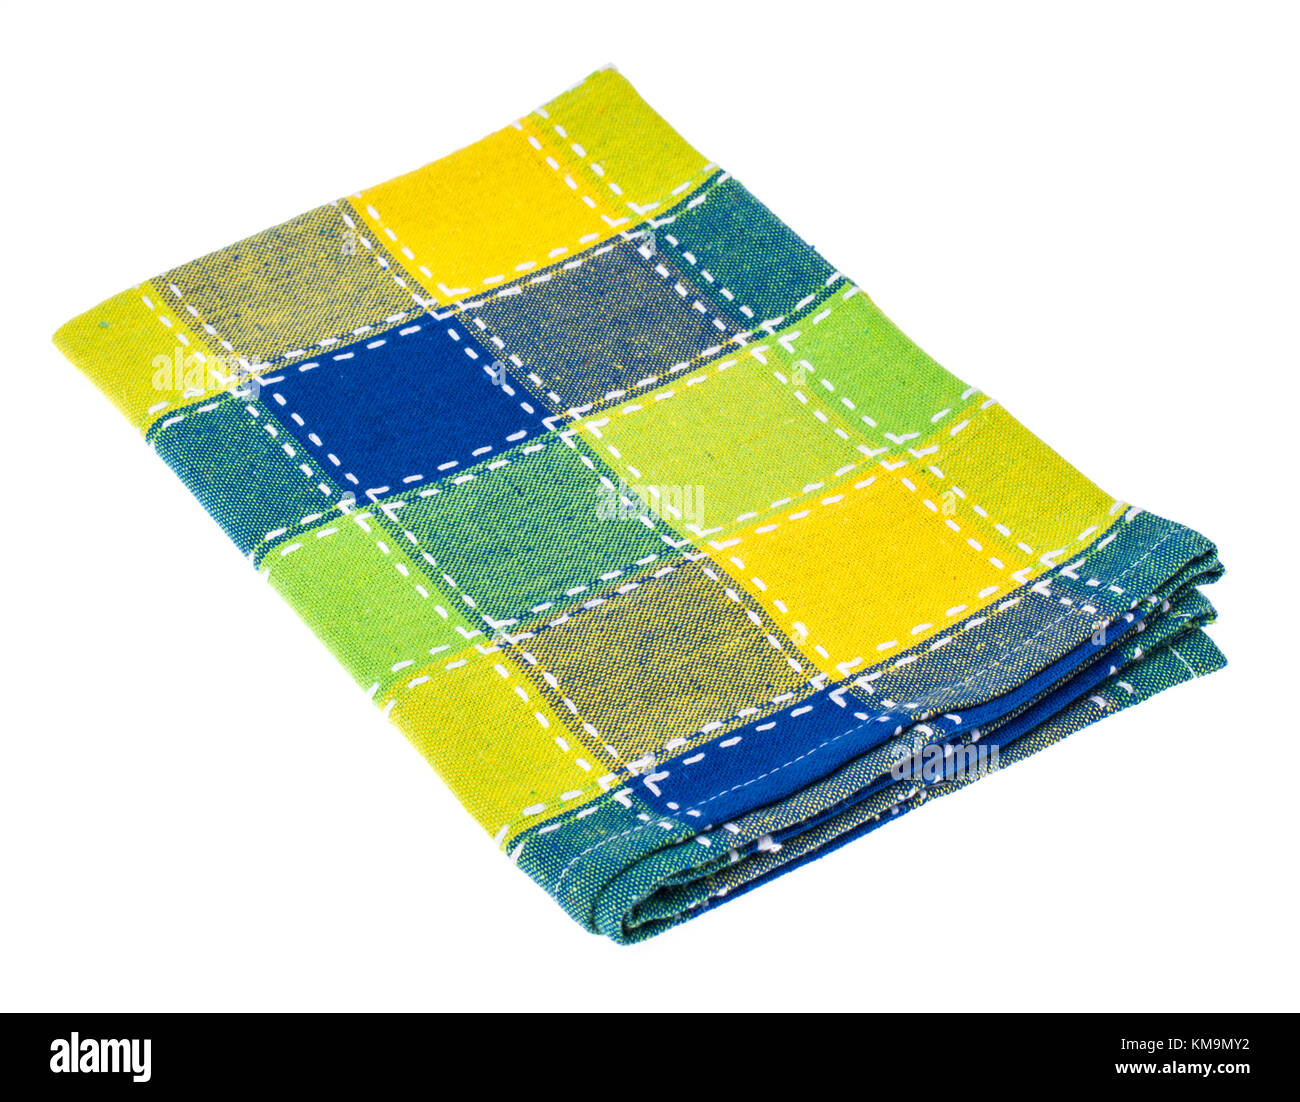 https://c8.alamy.com/comp/KM9MY2/napkins-and-kitchen-towels-of-different-colors-studio-photo-KM9MY2.jpg